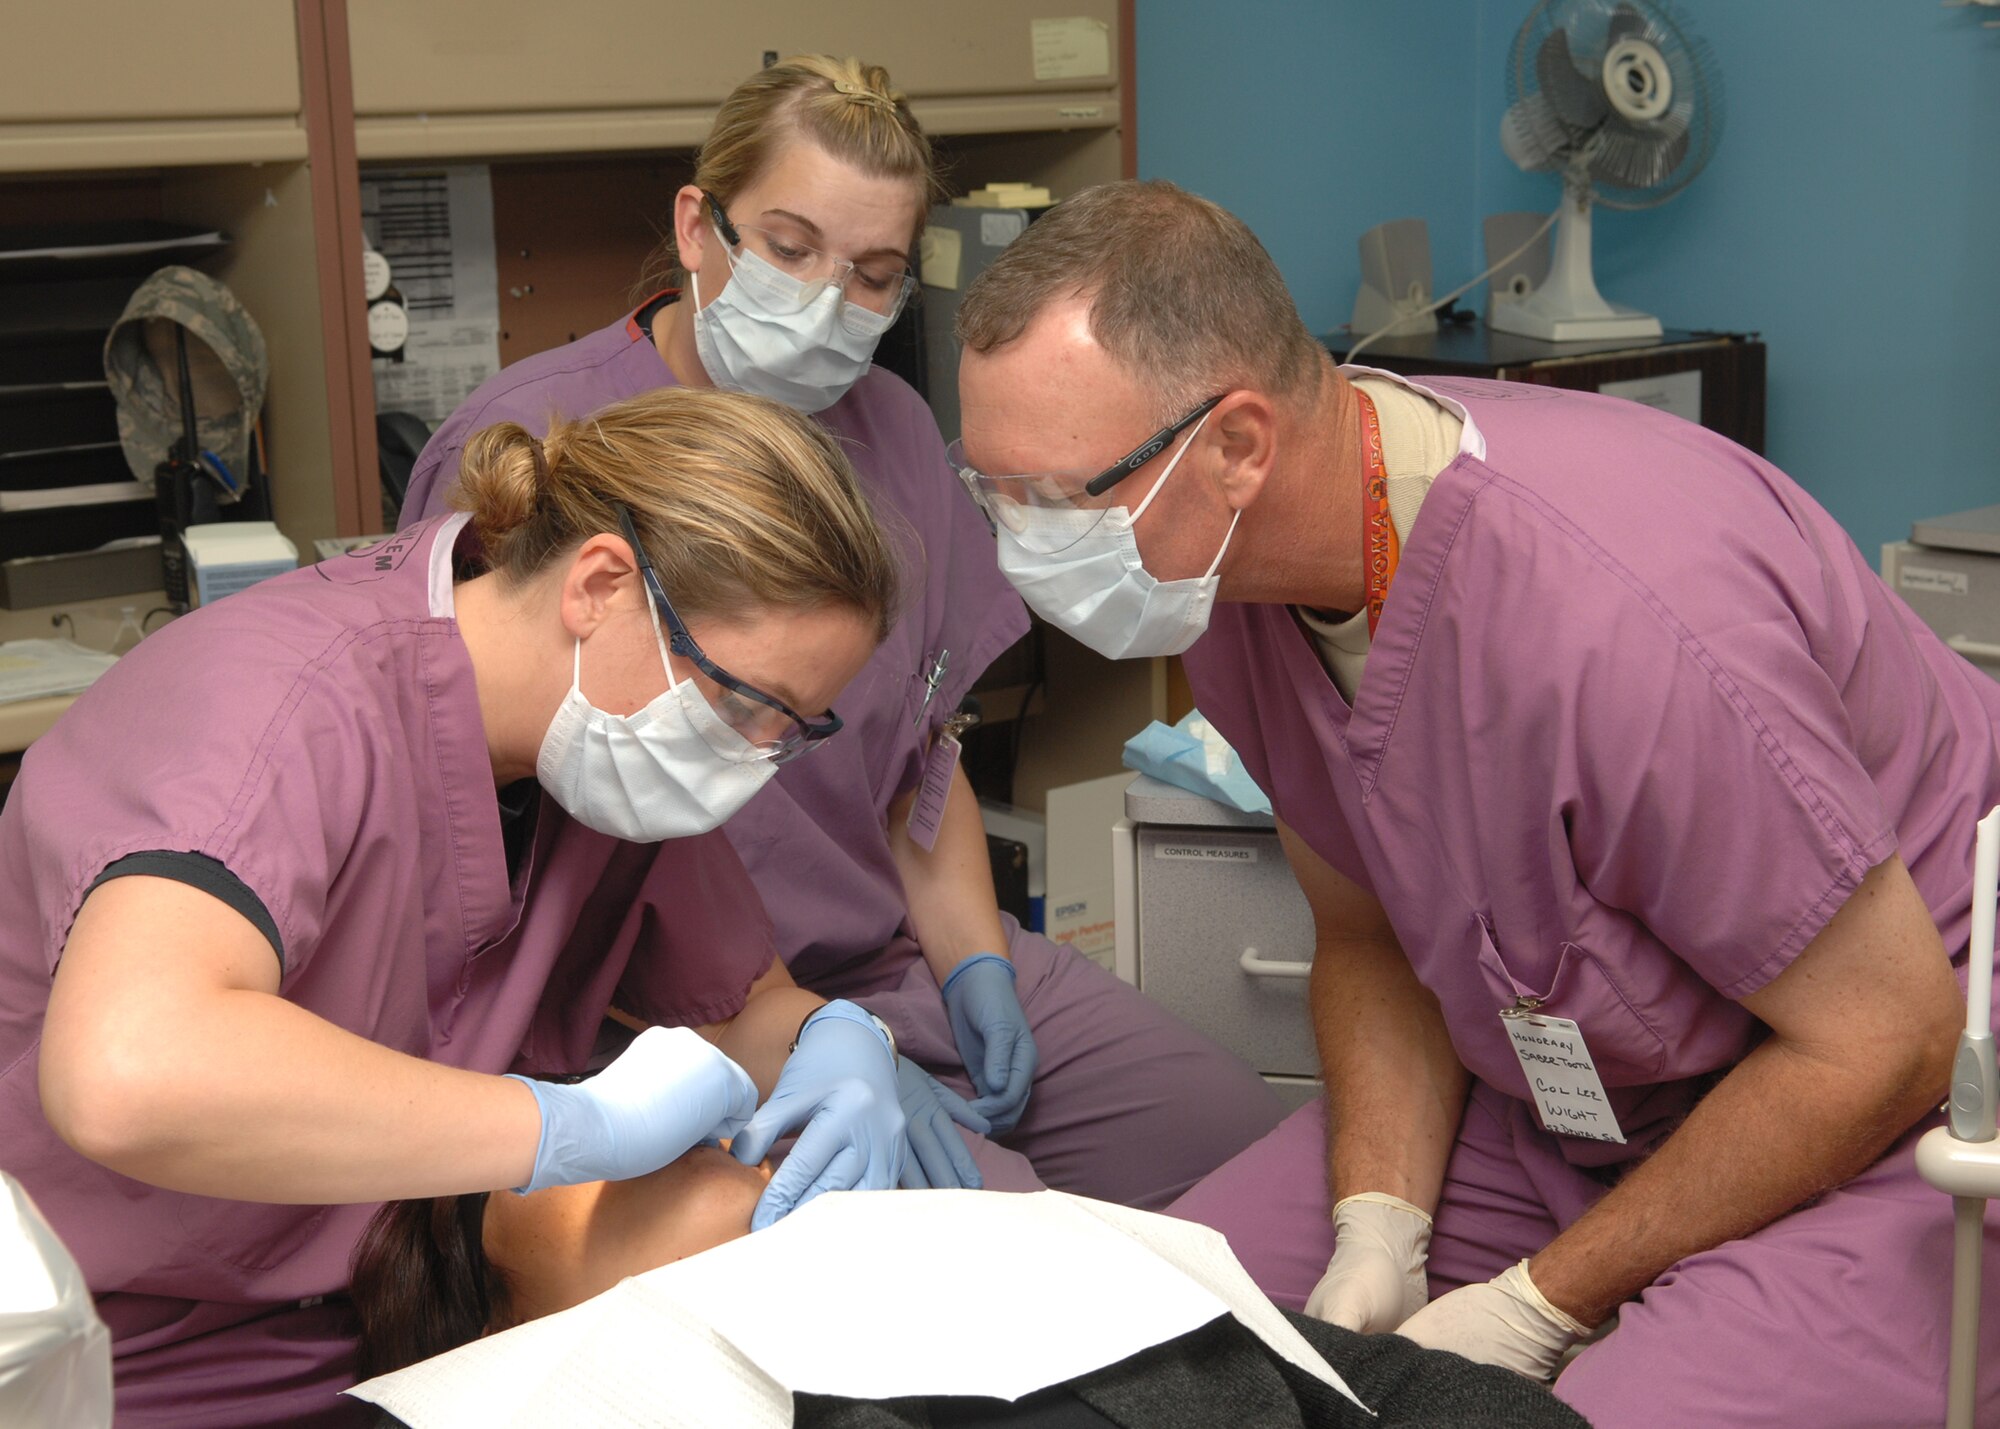 SPANGDAHLEM AIR BASE, Germany – Col. Lee Wight, 52nd Fighter Wing Commander, watches Capt. Christina Sheets, 52nd Dental Squadron Dentist as she assists a patient while participating in the commander shadow program with Senior Airman Bridgit Borseth, dental assistant 52nd Dental Squadron, 52nd Fighter Wing.  During the CC shadow program the CC shadows an Airman while the Airman performs the daily job.  (U.S. Air Force photo by Airman 1st Class Allen Pollard)